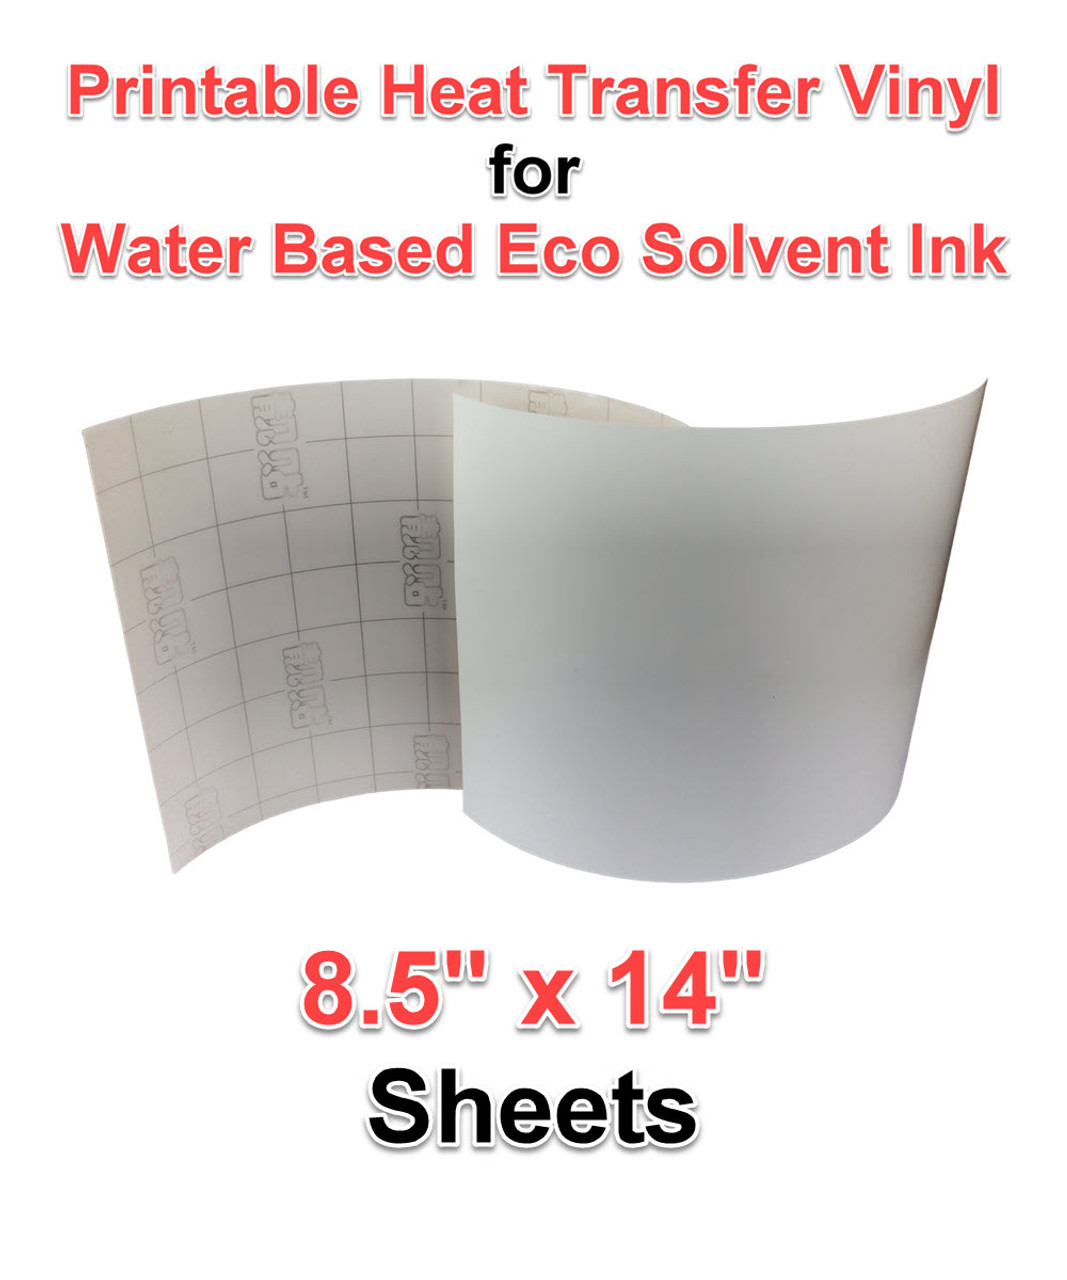 8.5 x 14 Printable Heat Transfer Vinyl for Water Based Eco Solvent Ink